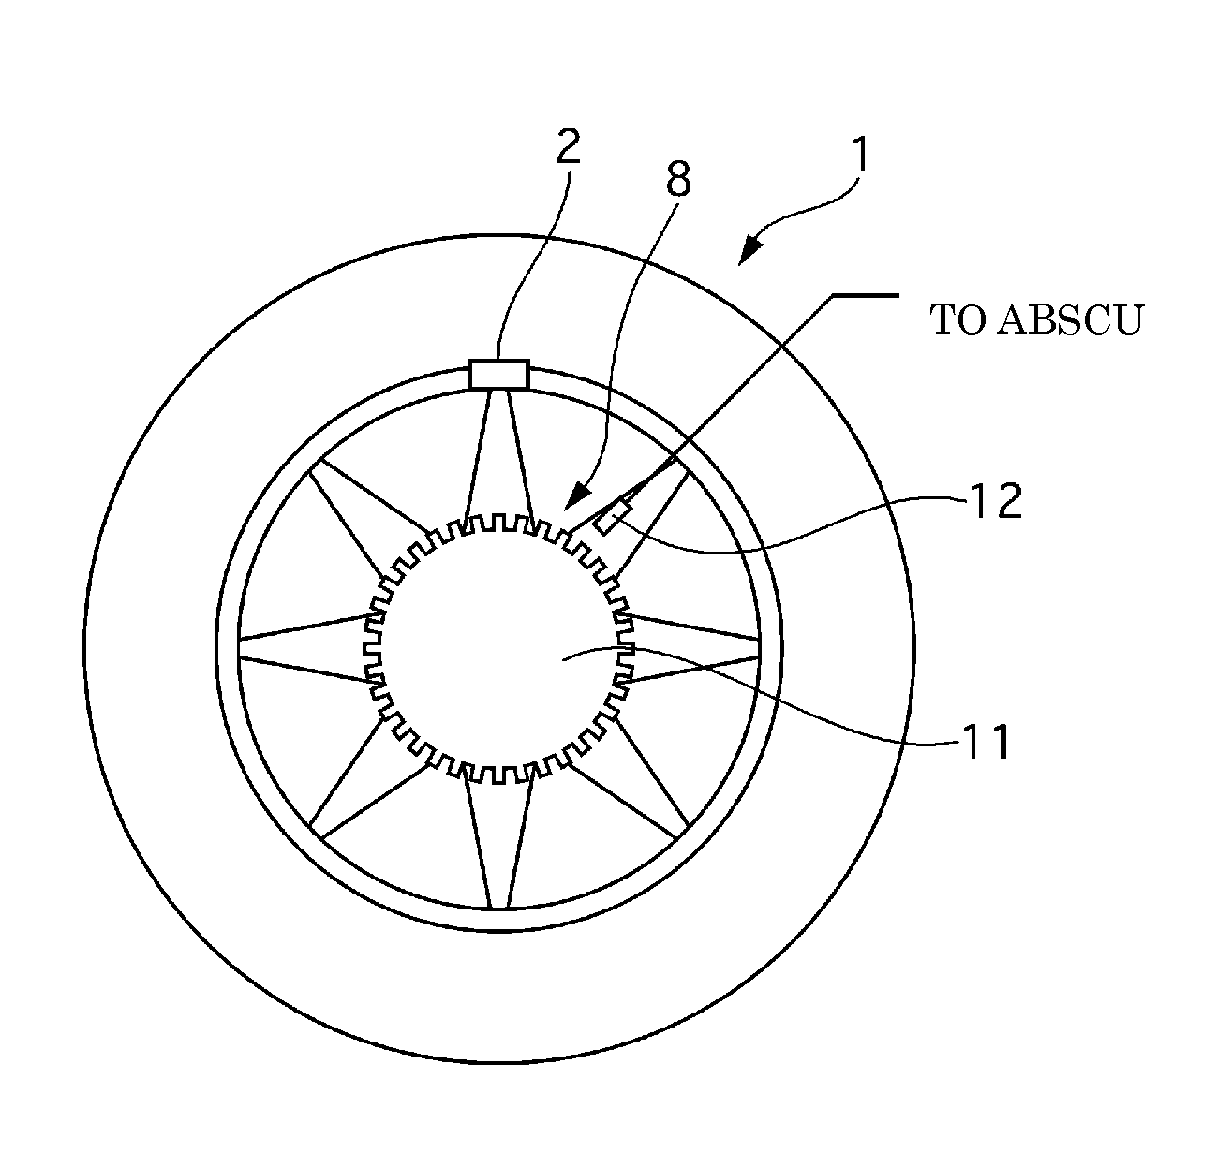 Tire air pressure transmission device and tire air pressure monitoring system